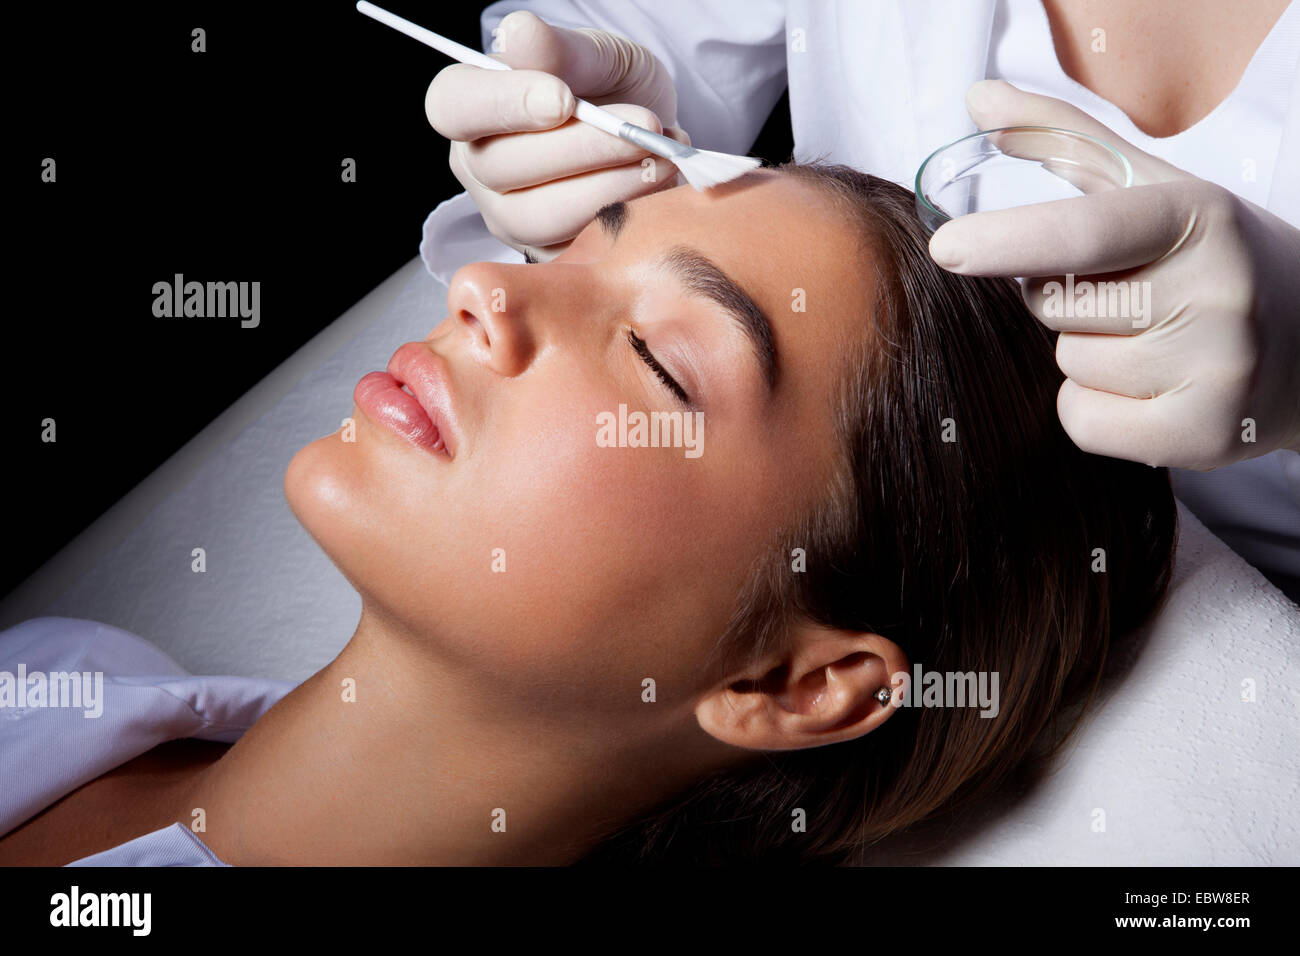 Woman getting a cosmetic skin treatment. Chemical peeling. Stock Photo